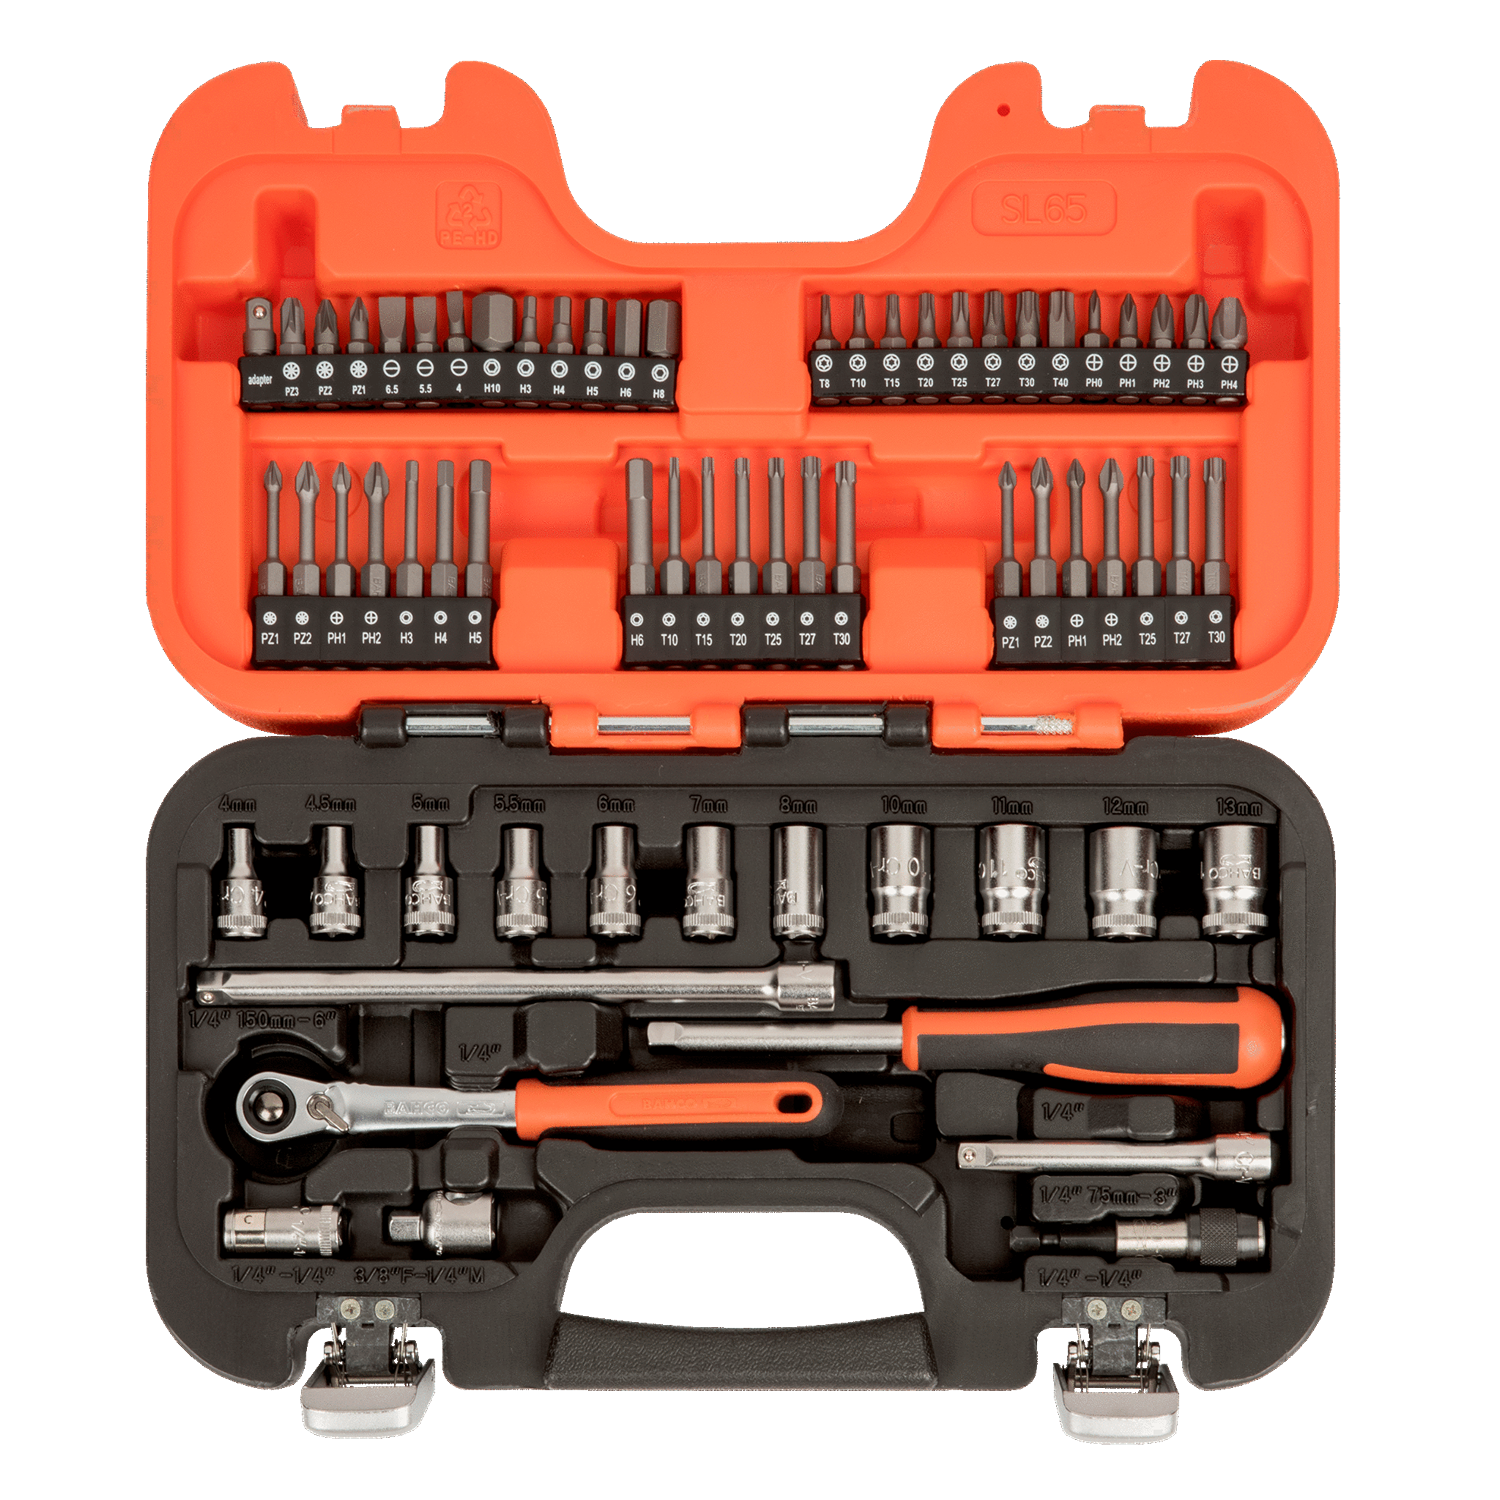 BAHCO SL65 1/4” Square Drive Socket Set Metric Hex Ratchet - Premium Socket Set from BAHCO - Shop now at Yew Aik.